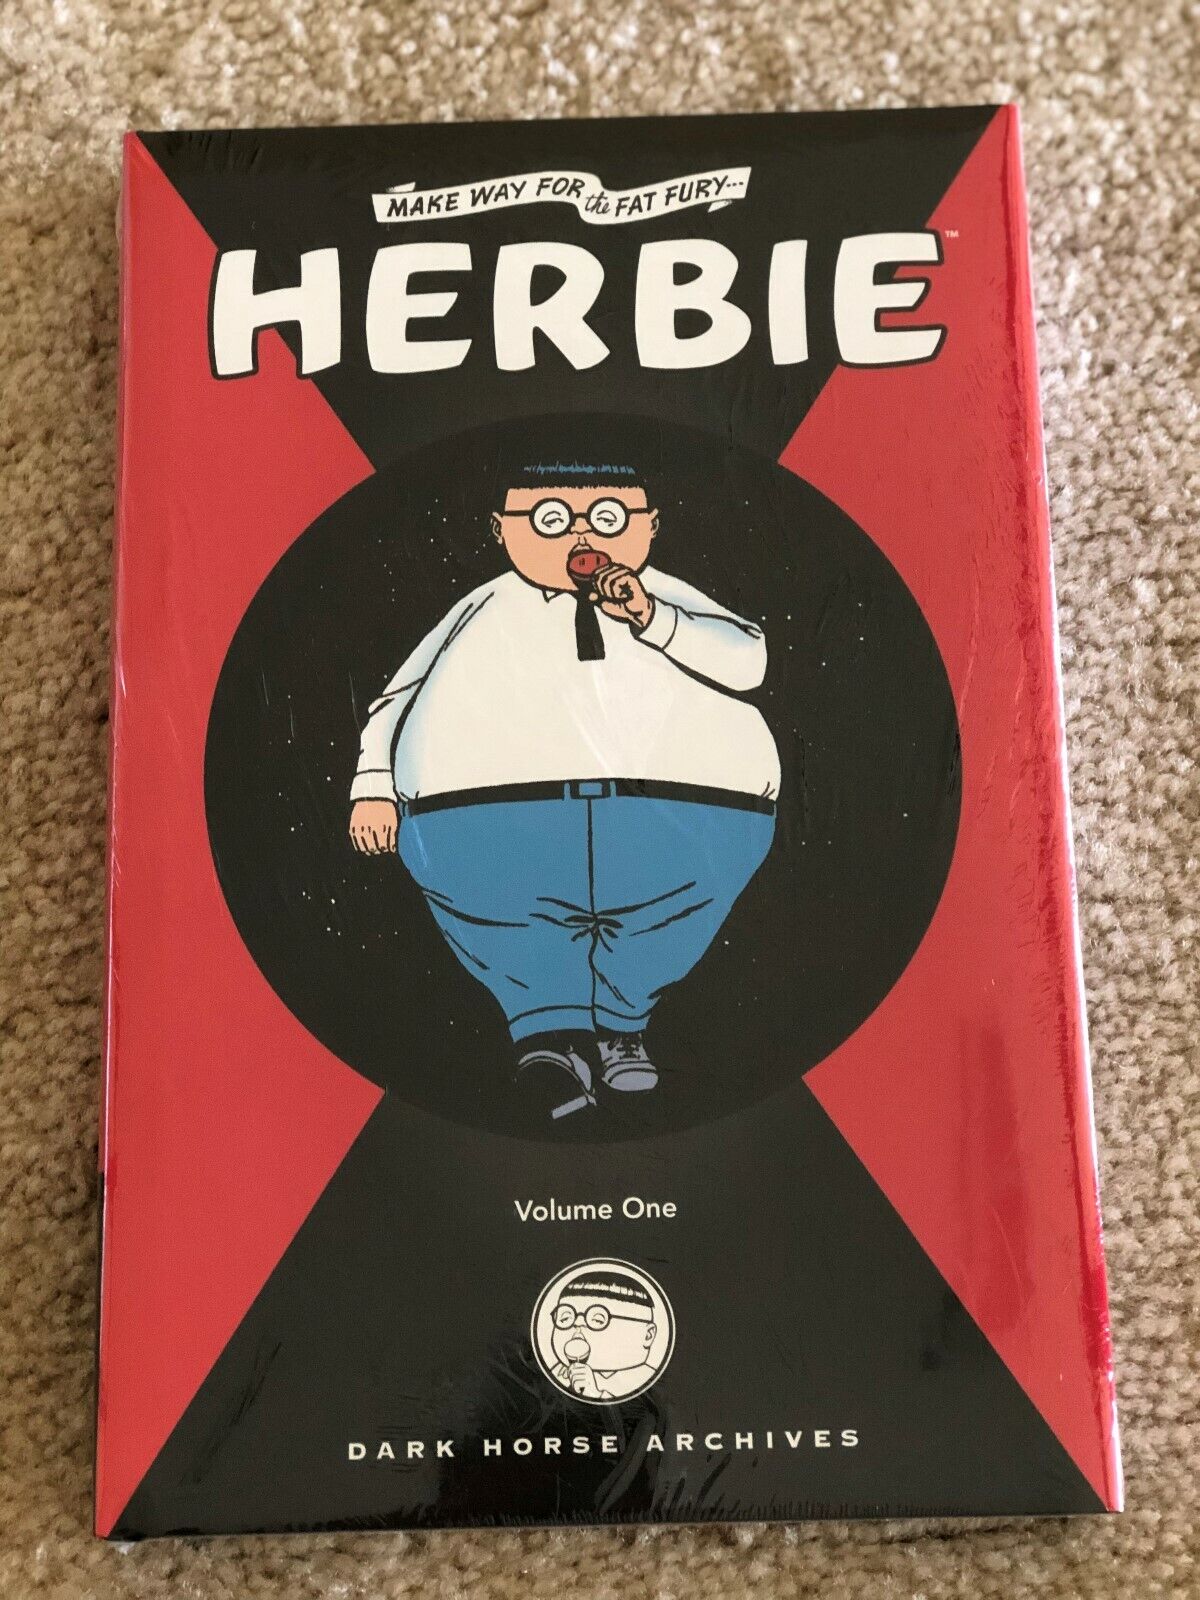 Herbie Archives Volume 1 SEALED ACG Dark Horse hardcover book The Fat Fury 